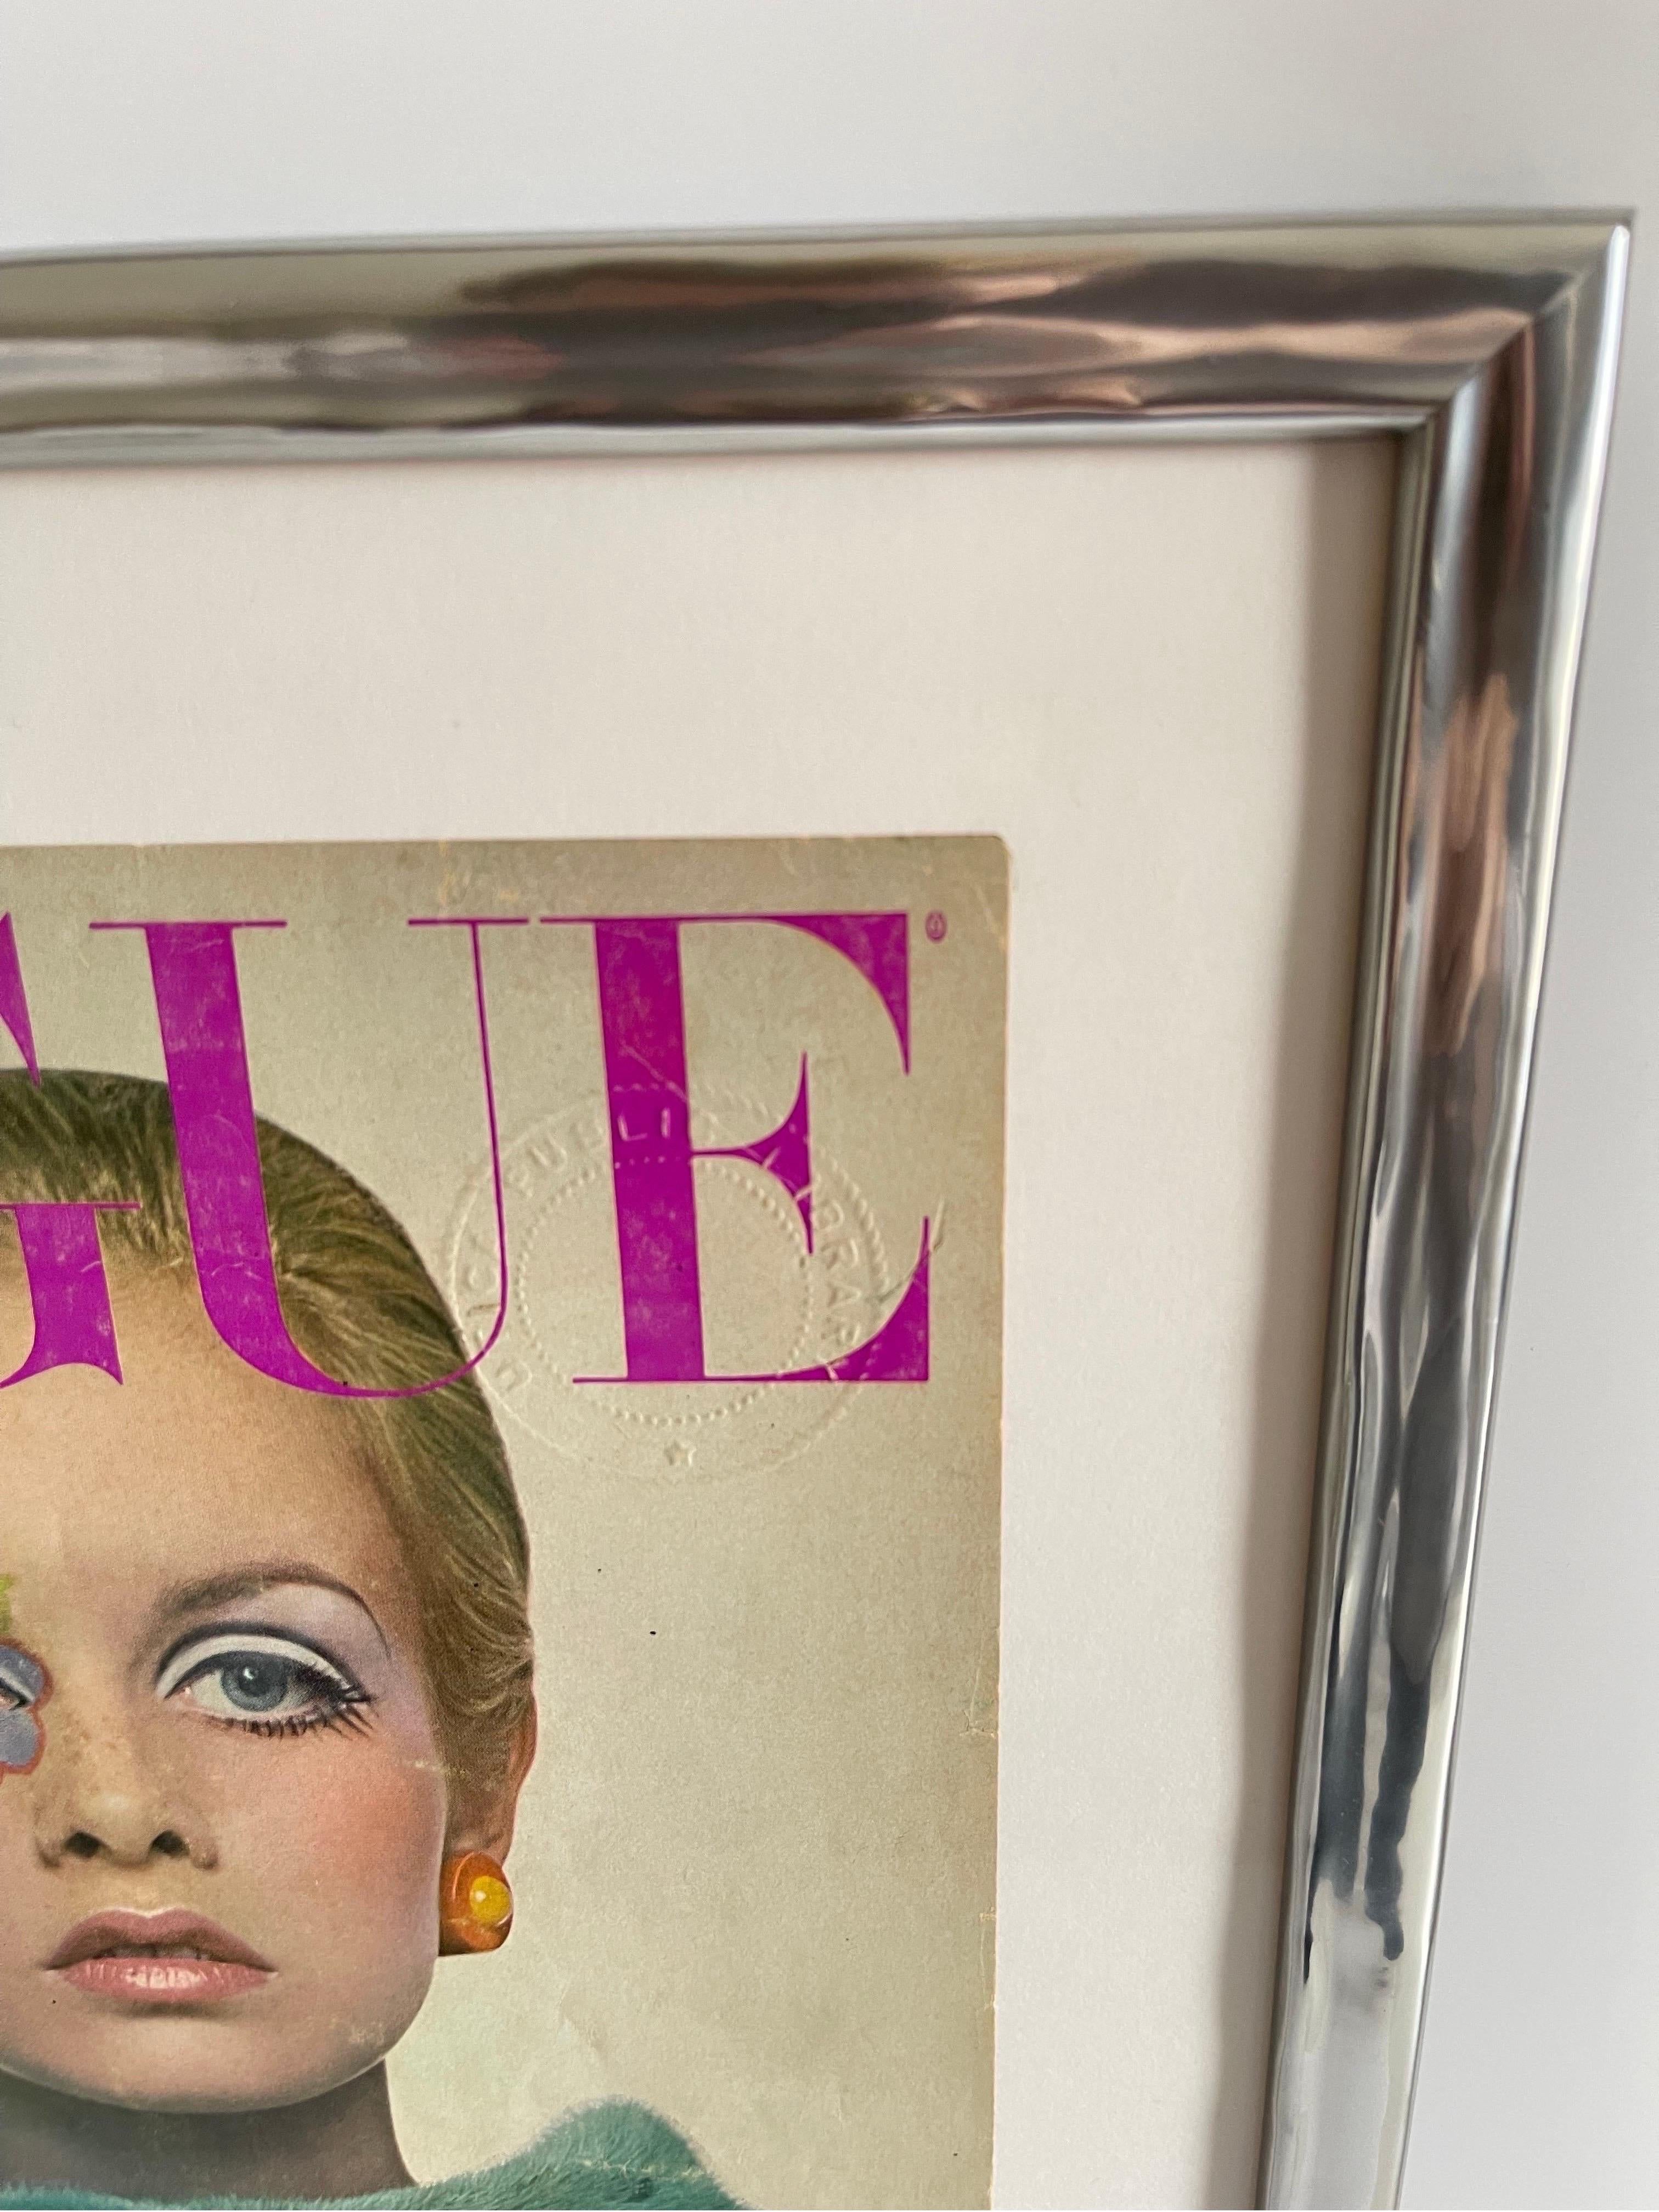 Mid-20th Century Vogue July 1967 Twiggy Cover Signed by Richard Avedon